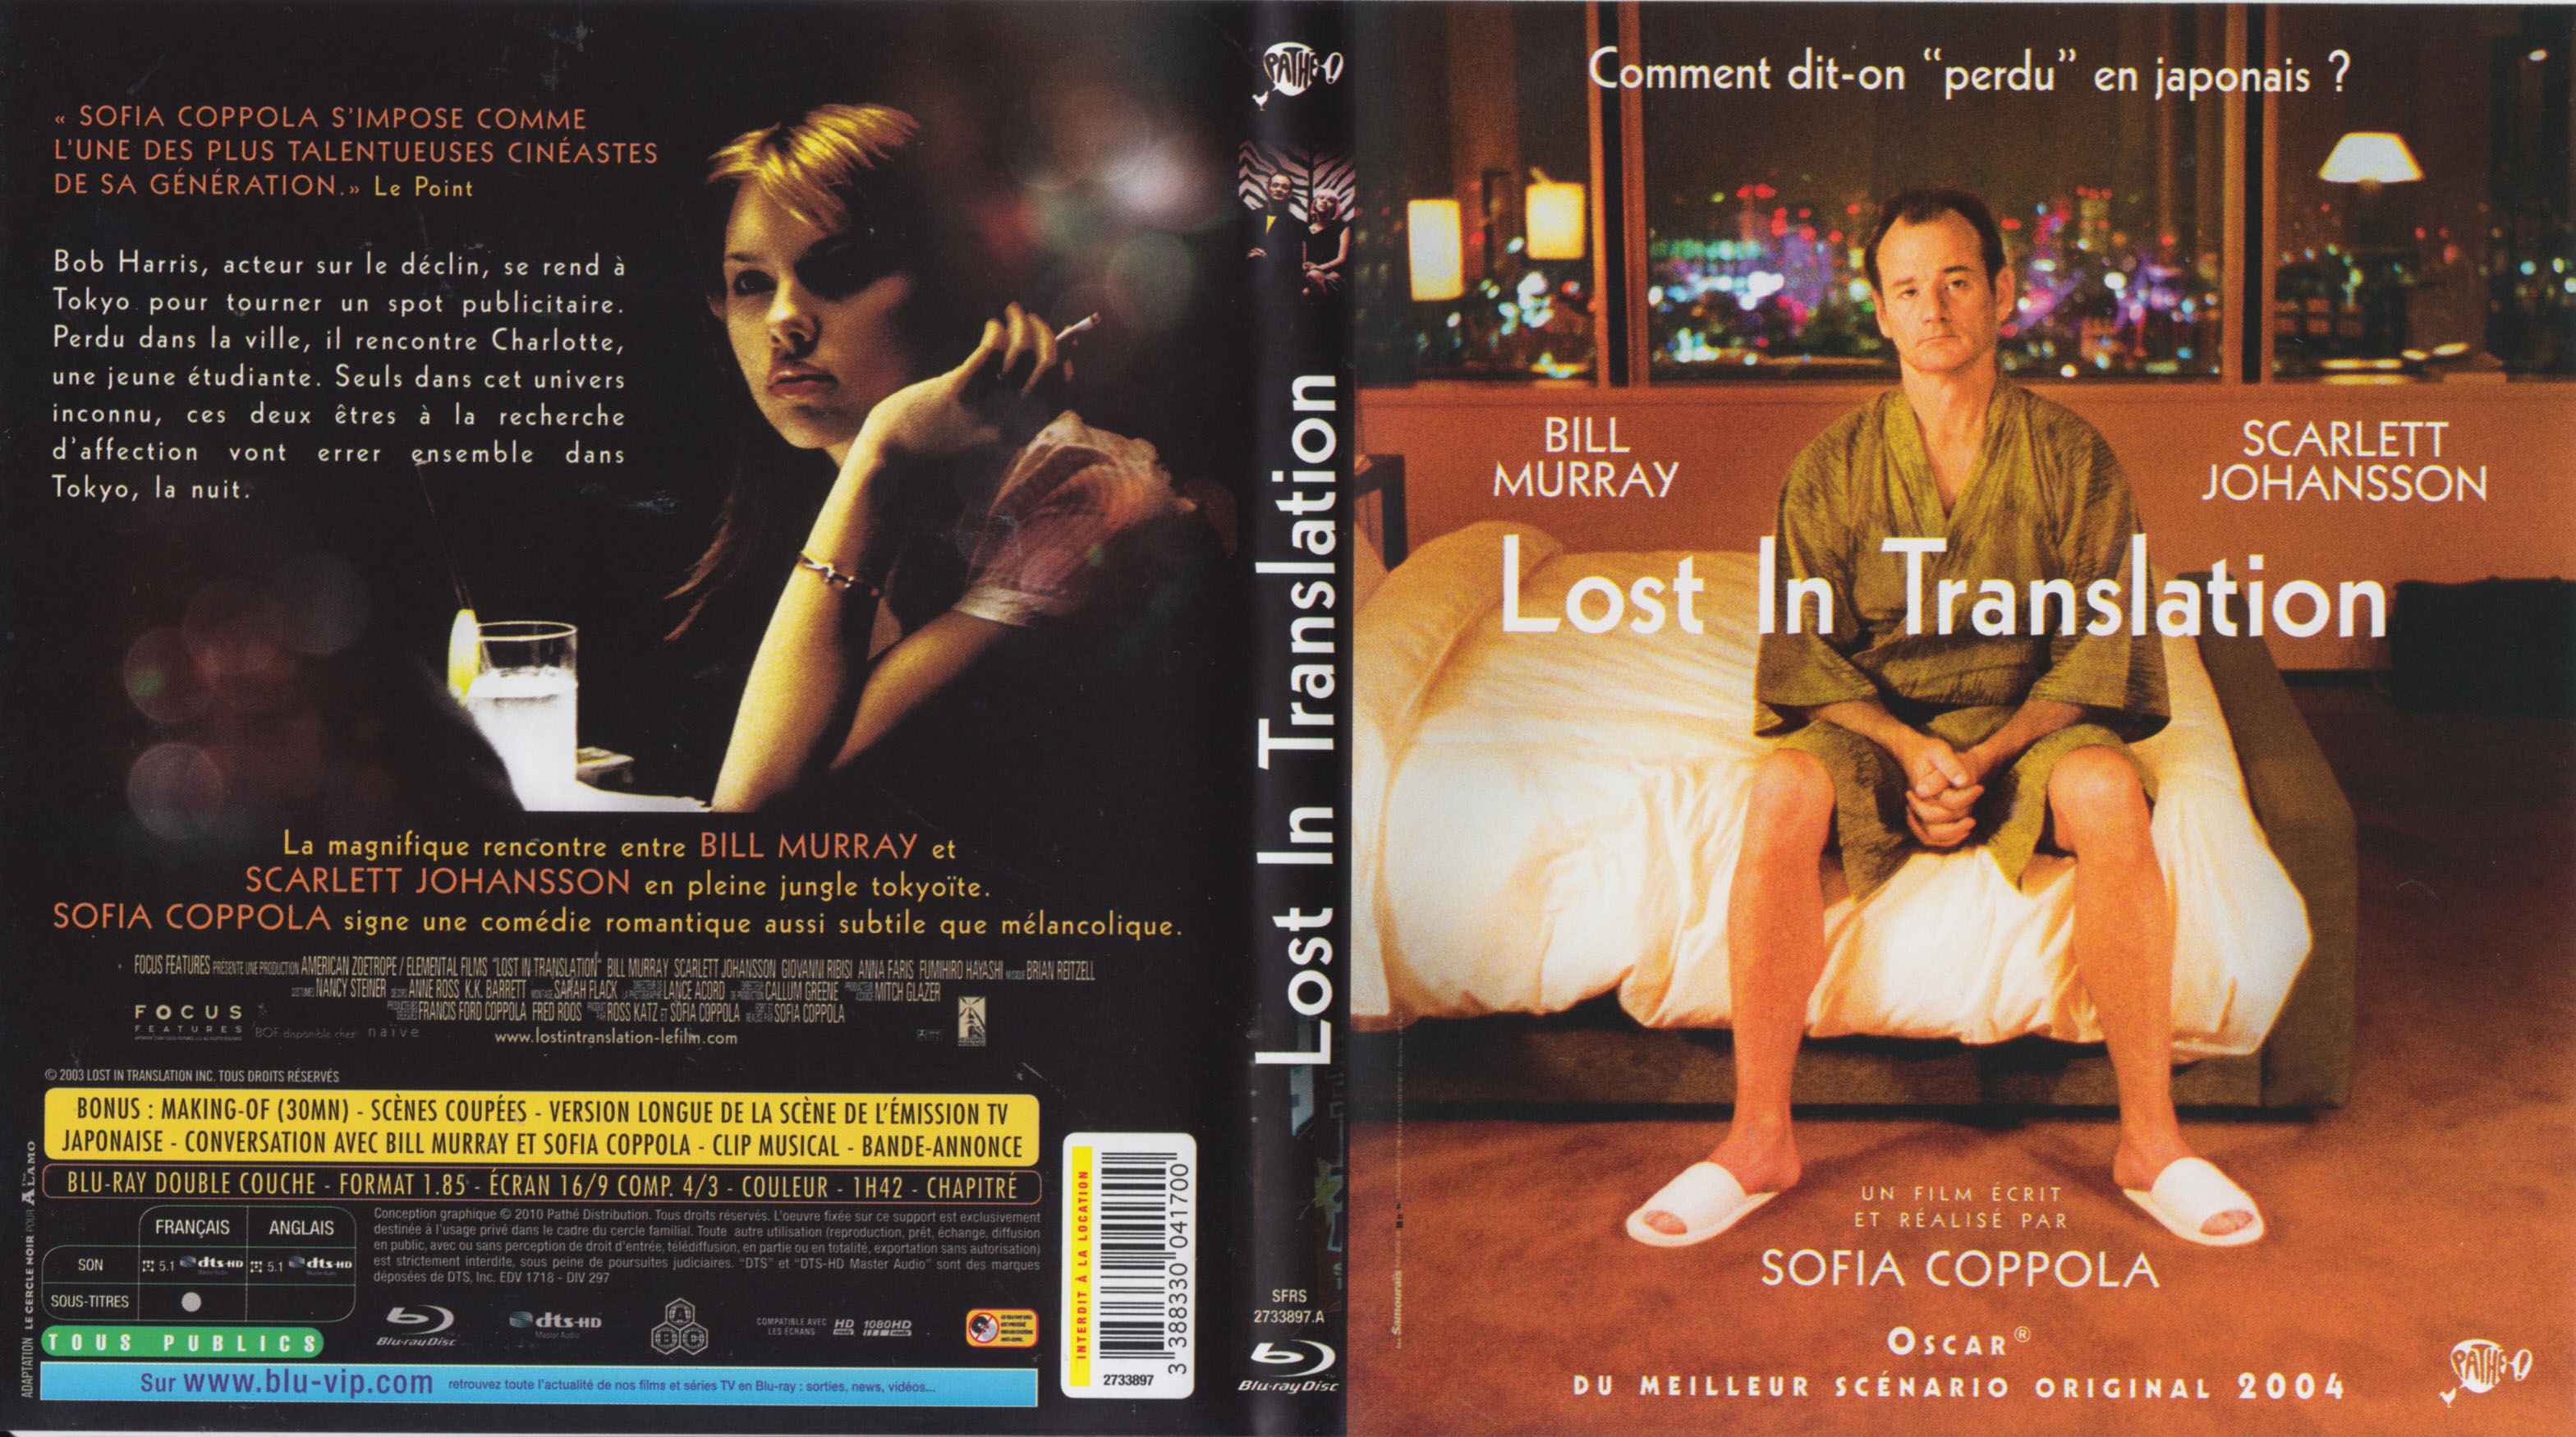 Jaquette DVD Lost in Translation (BLU-RAY)